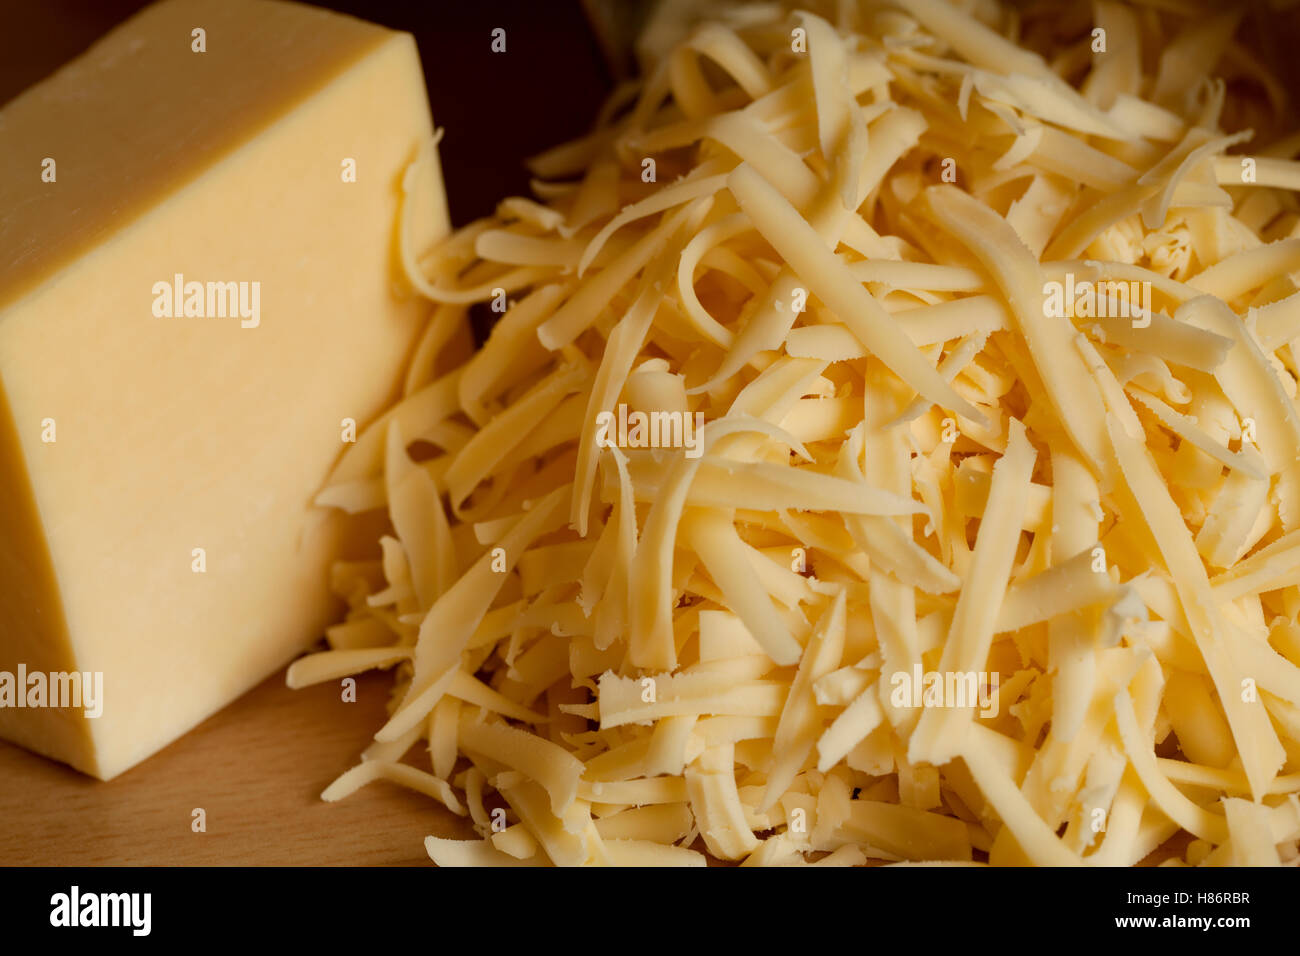 ankle of yellow and grated cheese on plank Stock Photo